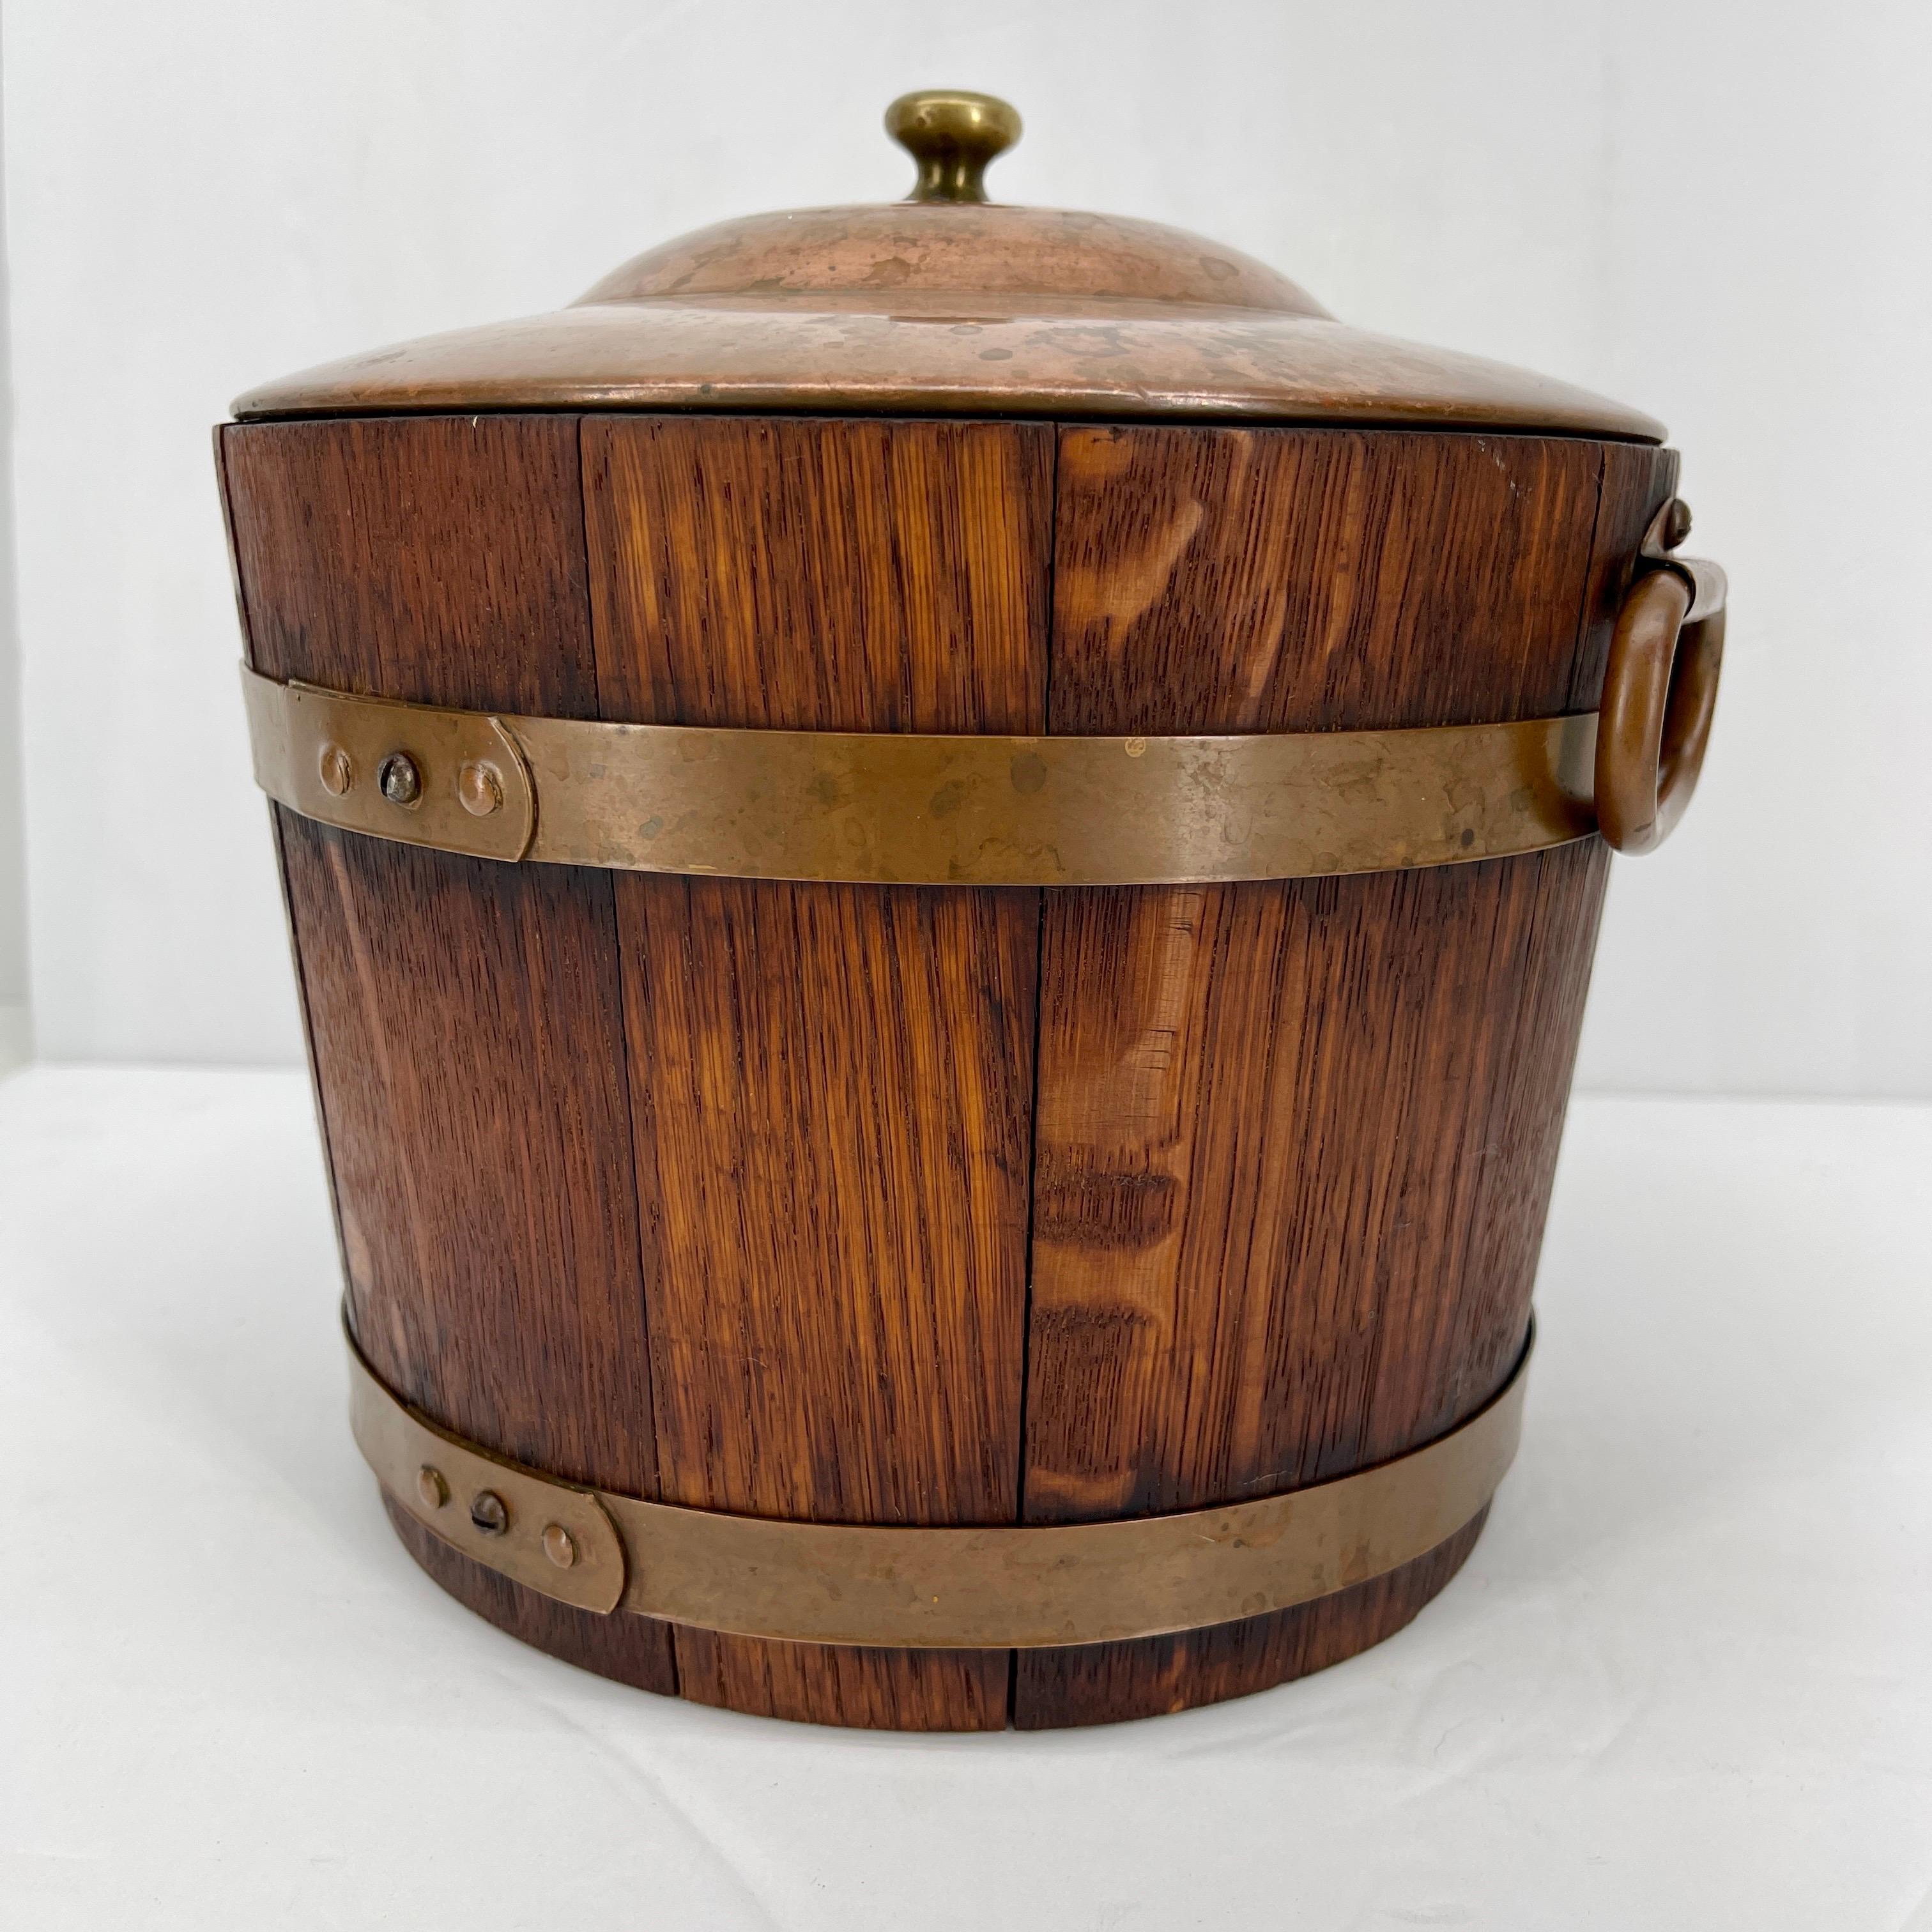 Charming English oak ice bucket with brass double banded accents and handles.
The ice bucket has the original mirror glass insert for better keeping the ice cubes cold.